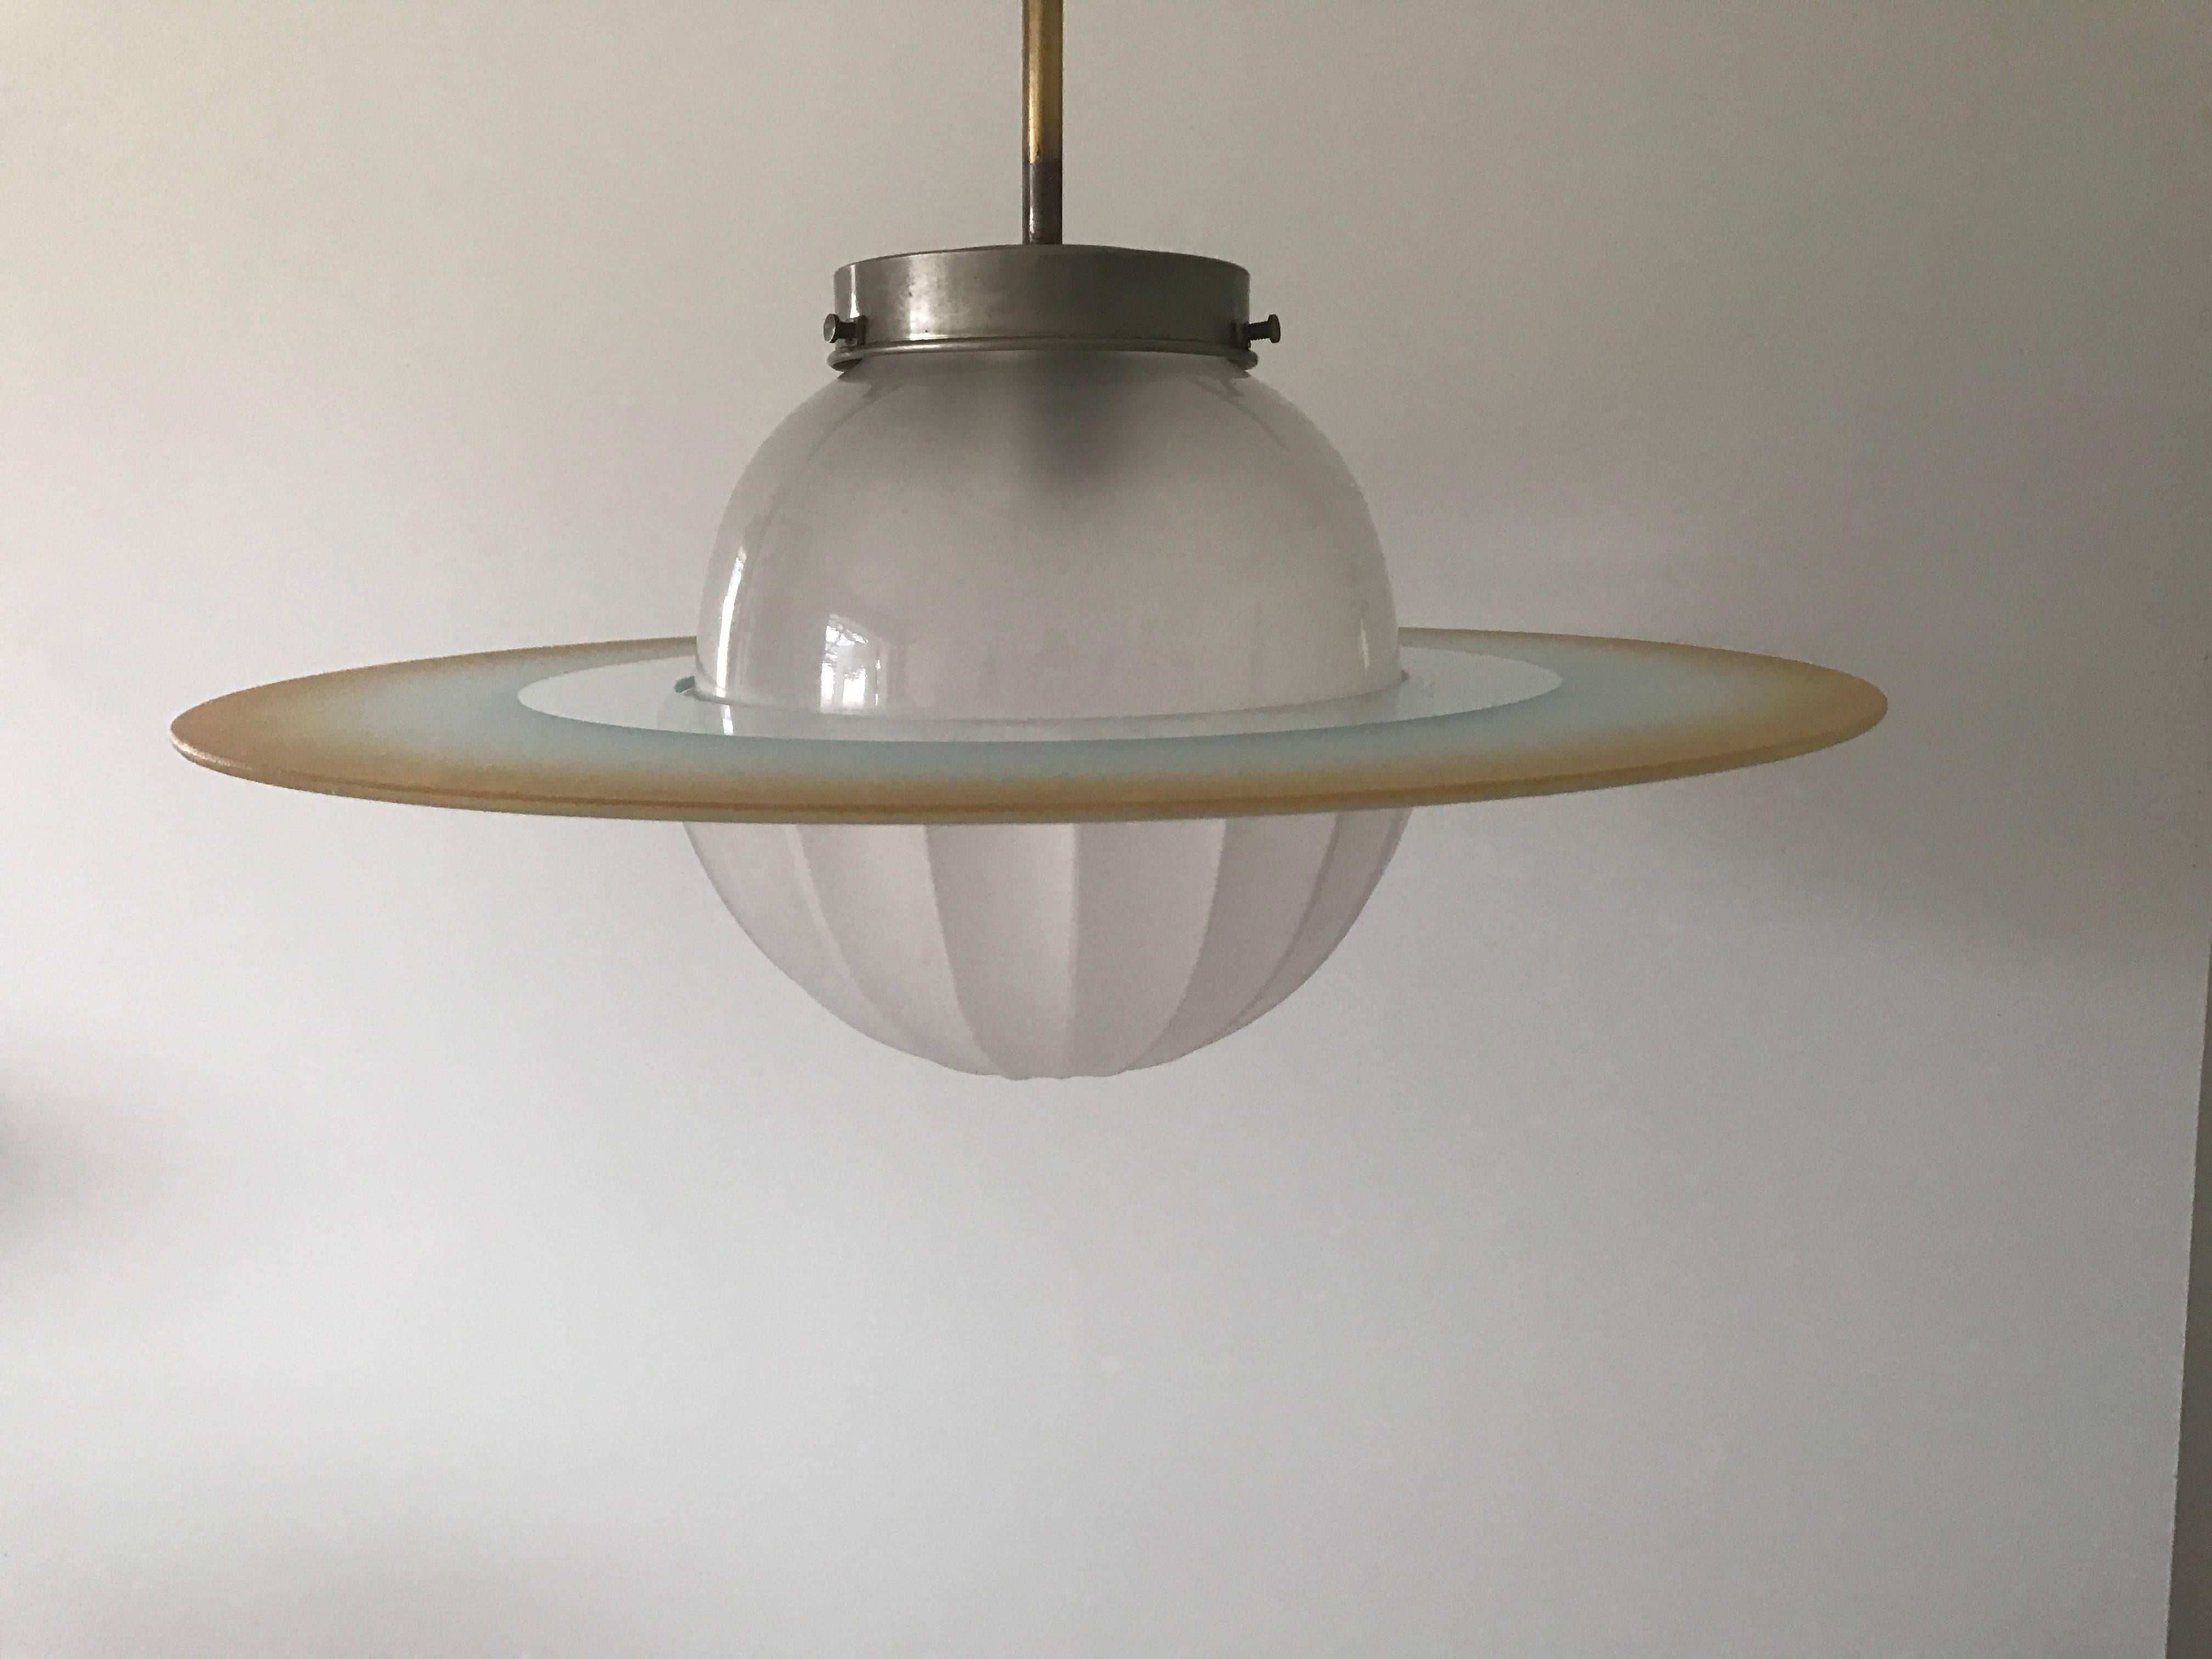 1935 Swedish Art Deco Functionalism glass Saturn lamp.
A very rare and beautiful Saturn lamp with a beautiful skight fading orange disc shade. This lamp was most likely made somewhere around 1935-1940. The lamp is in a fantastic original condition,